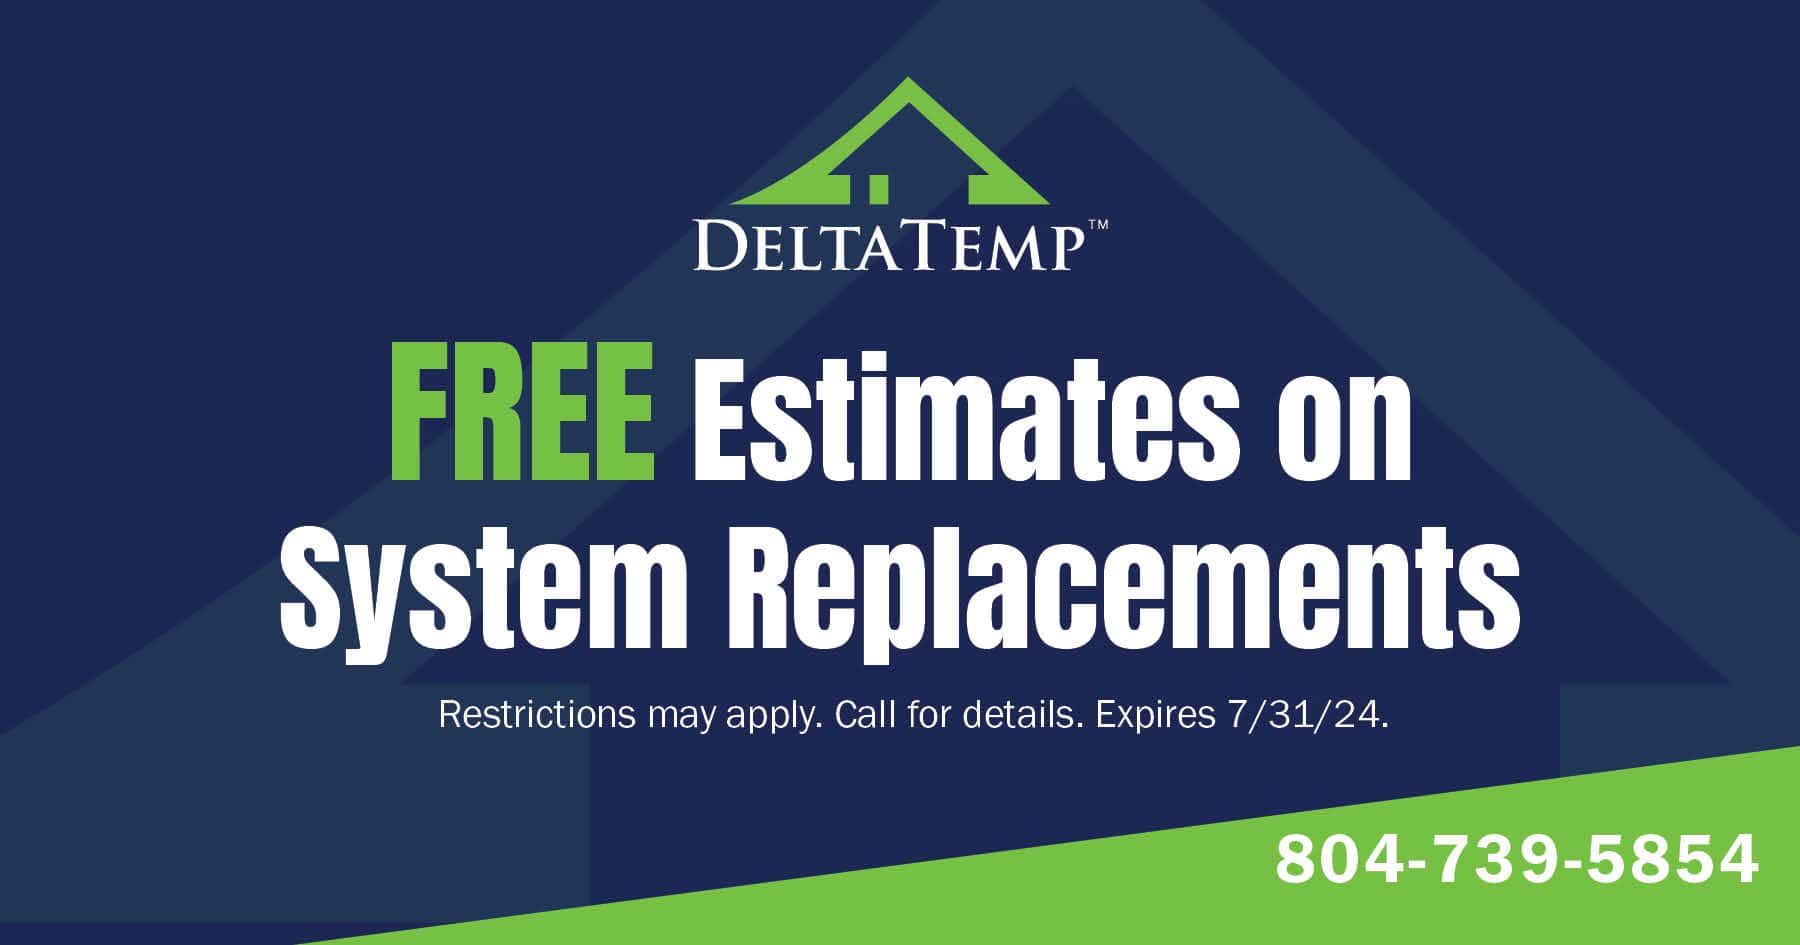 Free estimates on system replacements. Restrictions may apply. Call for details. Expires 7/31/2024.